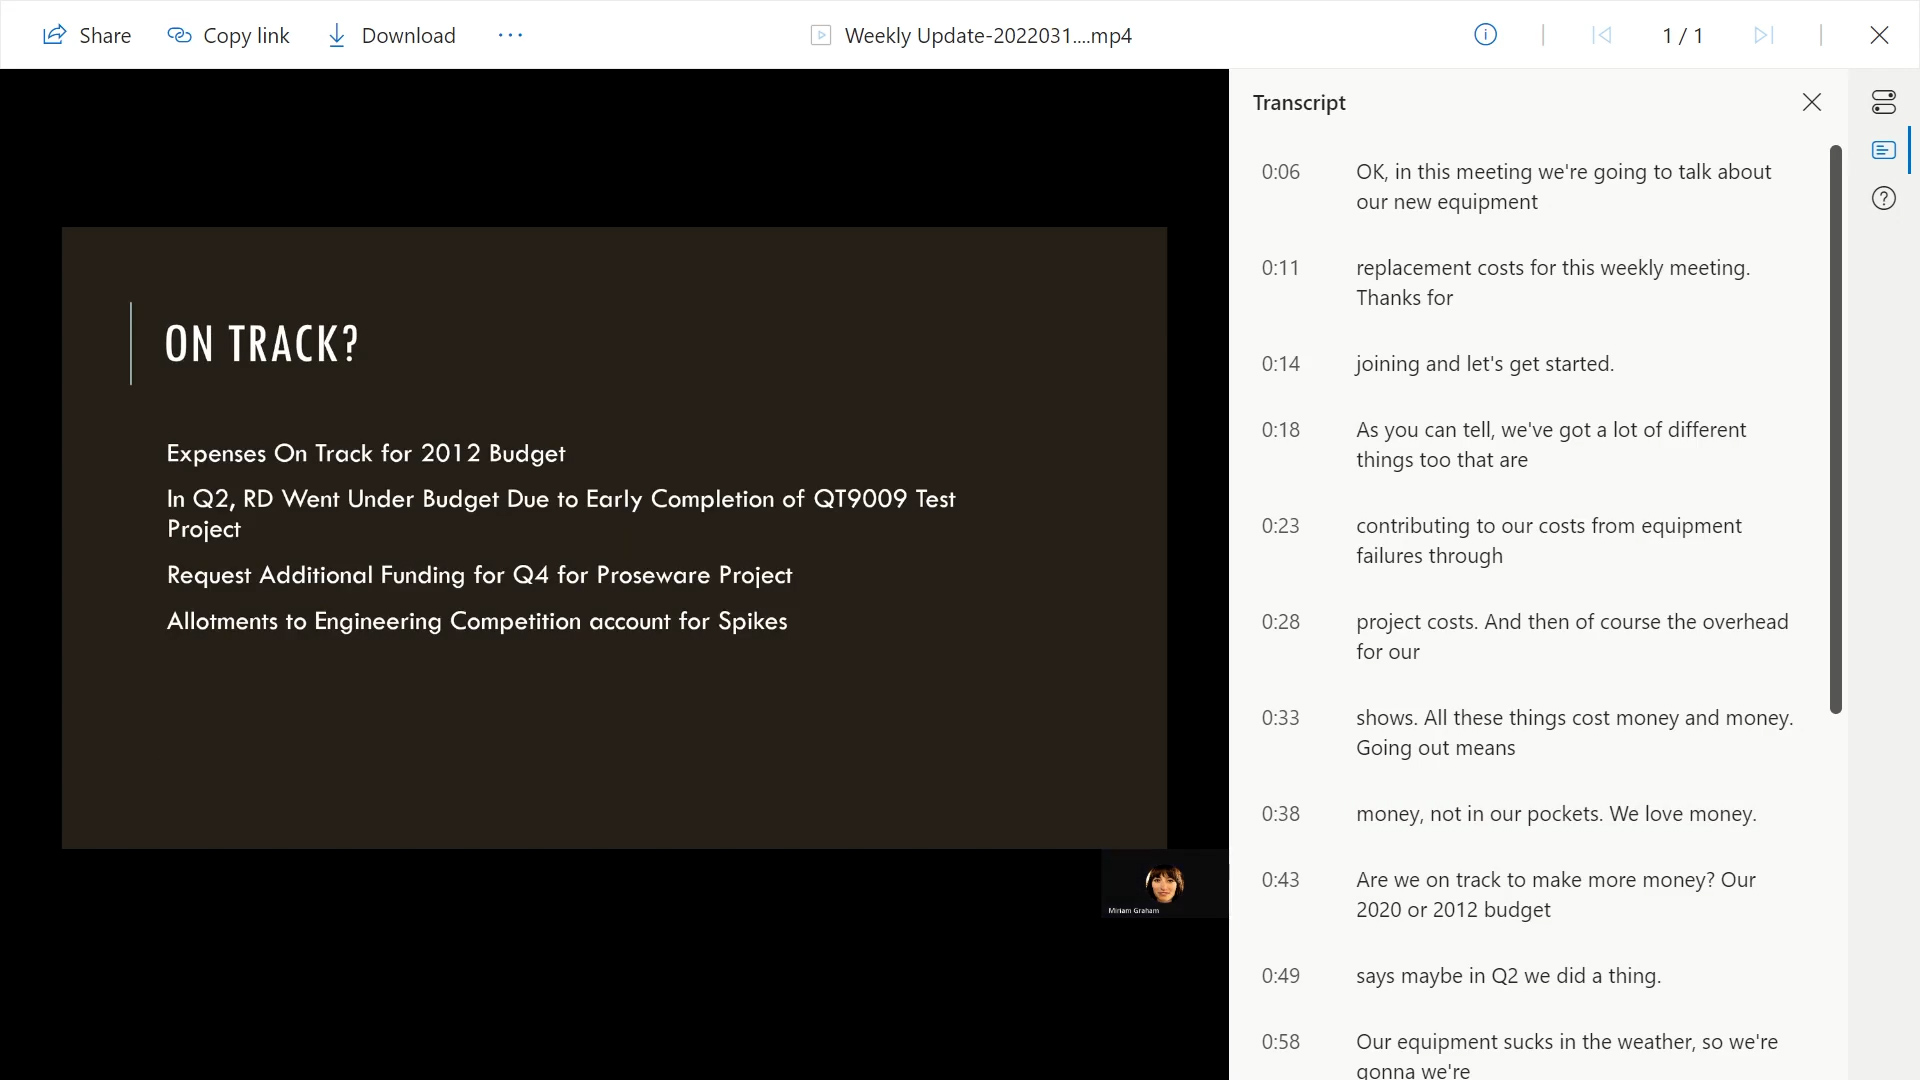 screenshot of the full video transcription inside of the video player